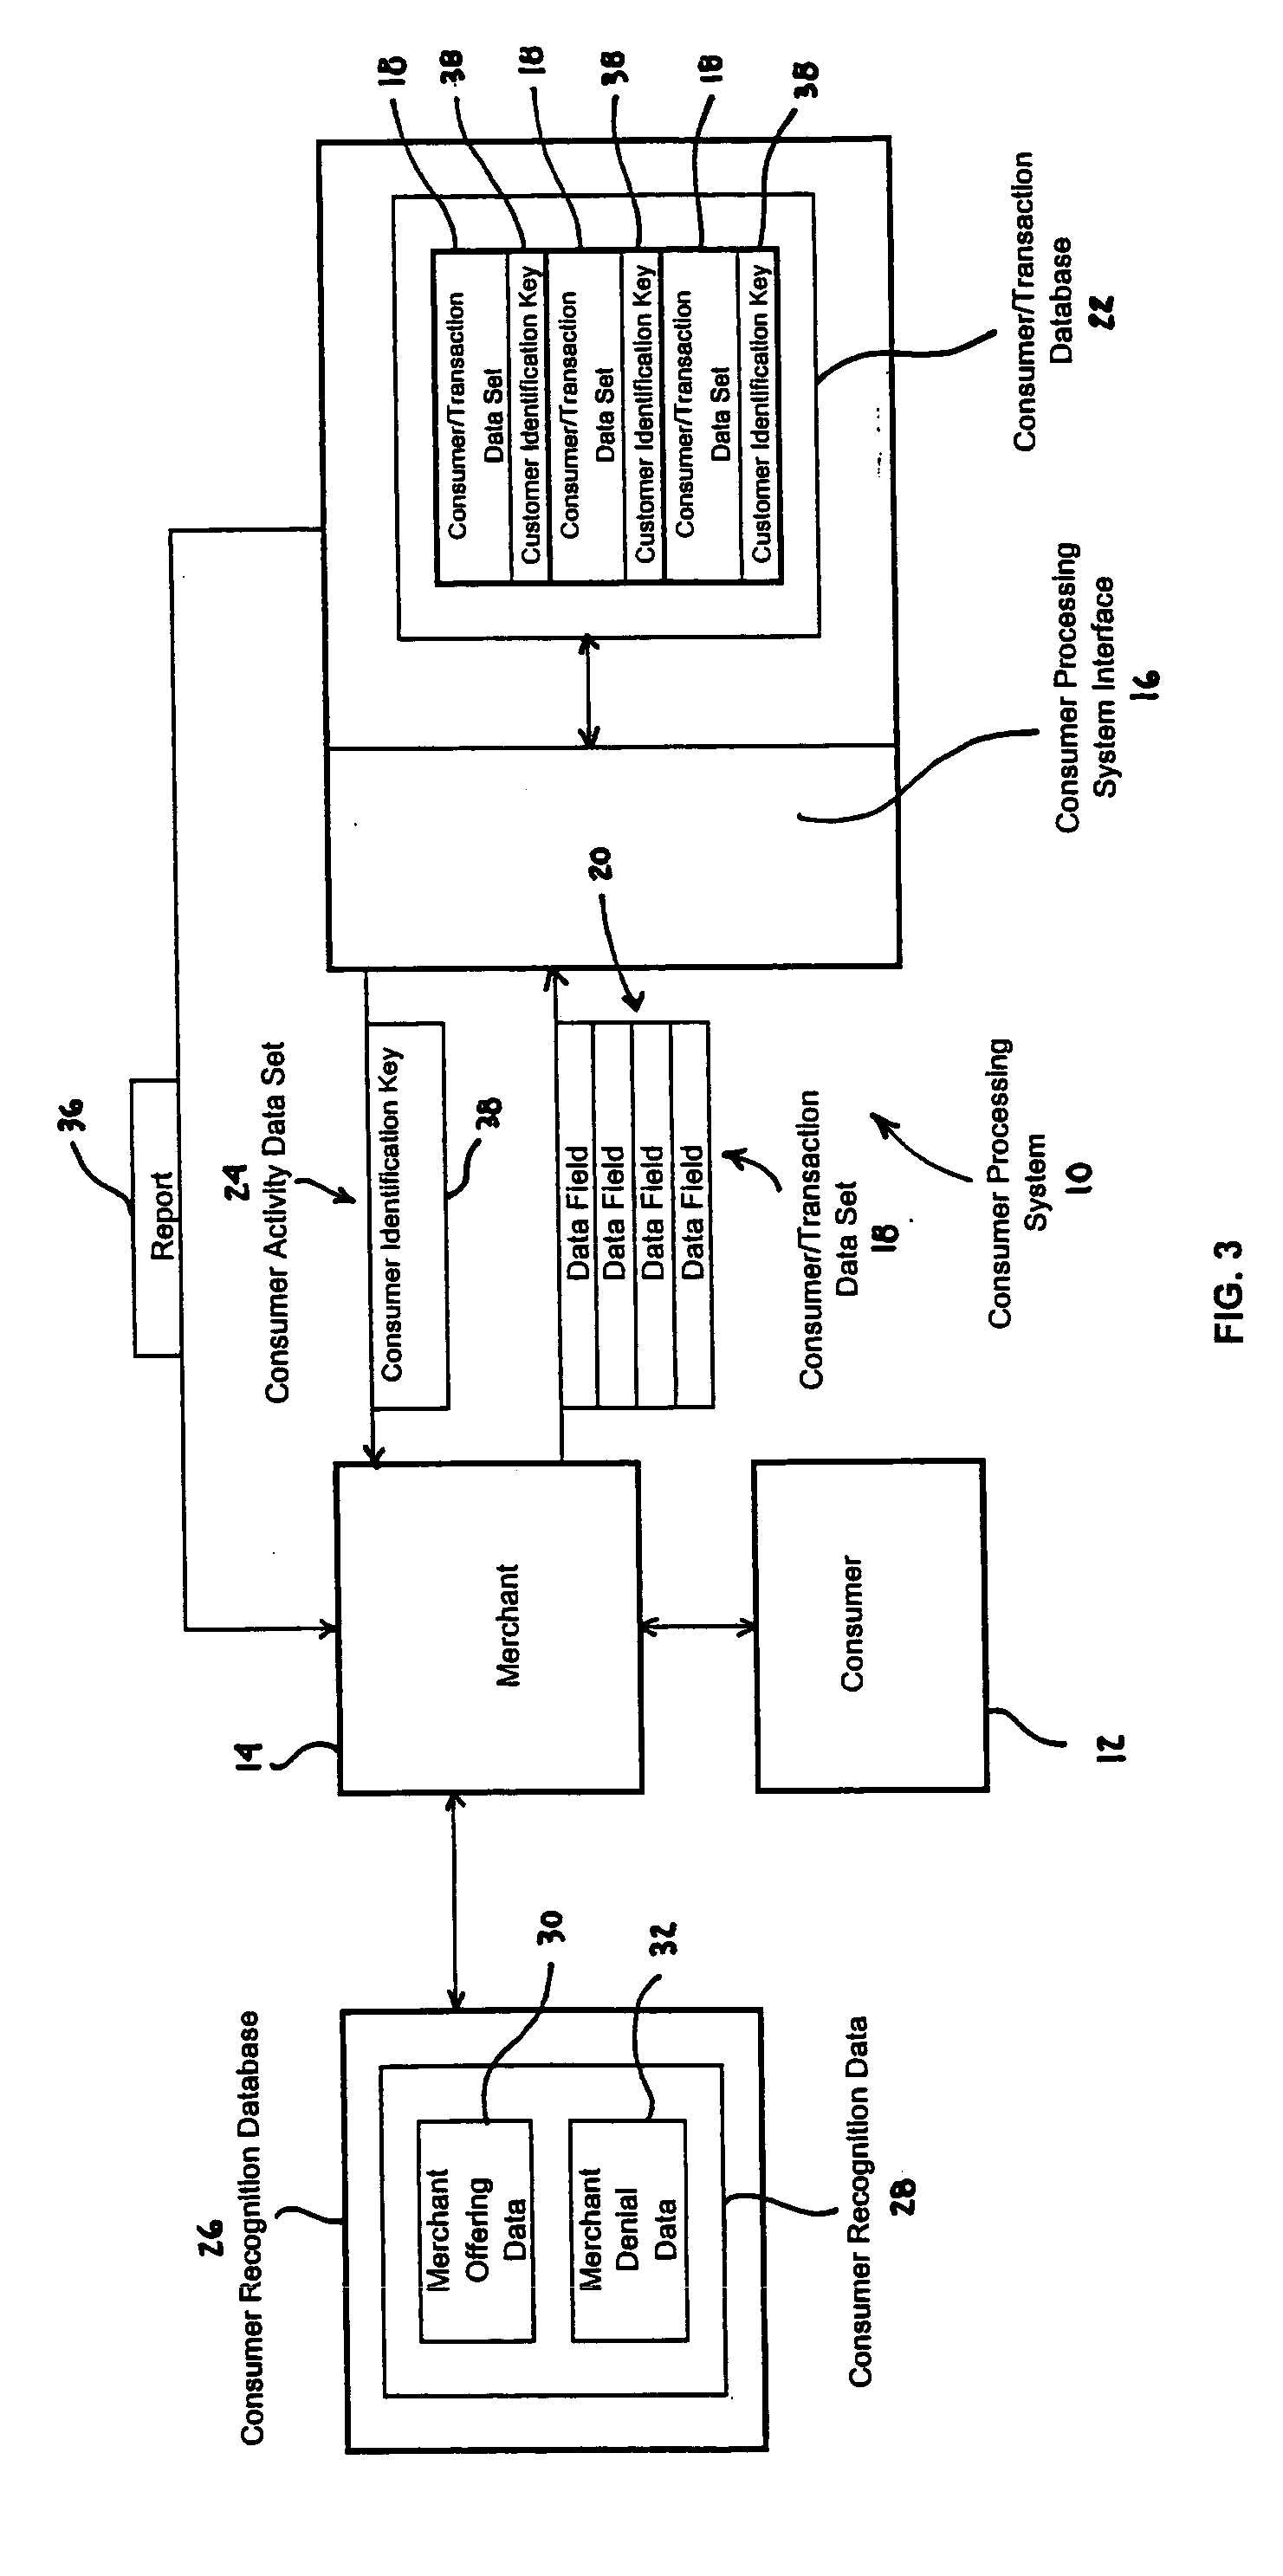 Consumer processing system and method